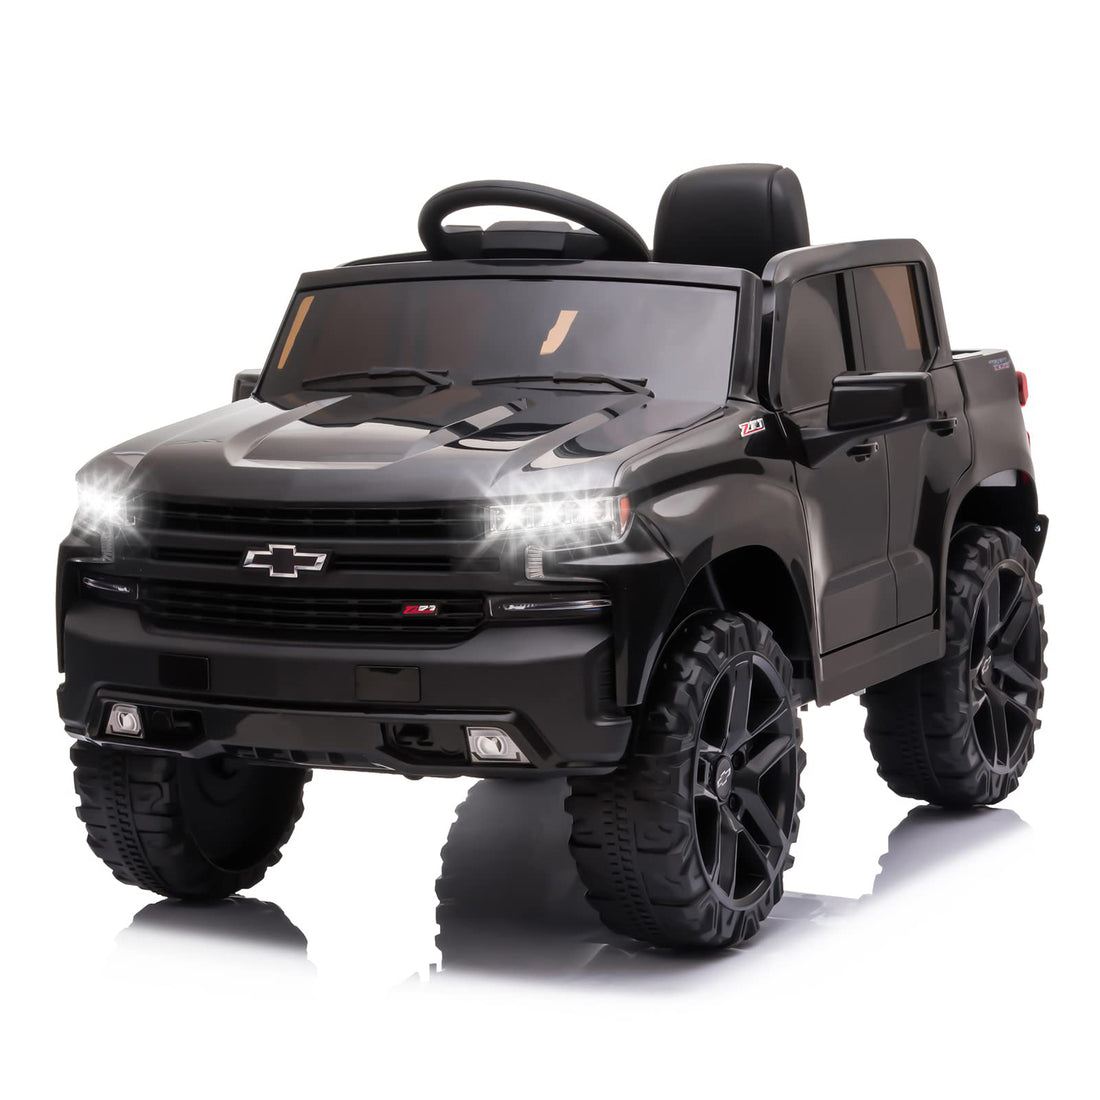 12V Ride on Car with Remote Control, Battery Powered Licensed Chevrolet Silverado GMC Kids Ride On Truck, Toddler Electric Vehicles Toys,Music,FM,Bluetooth, Spring Suspension, LED Light